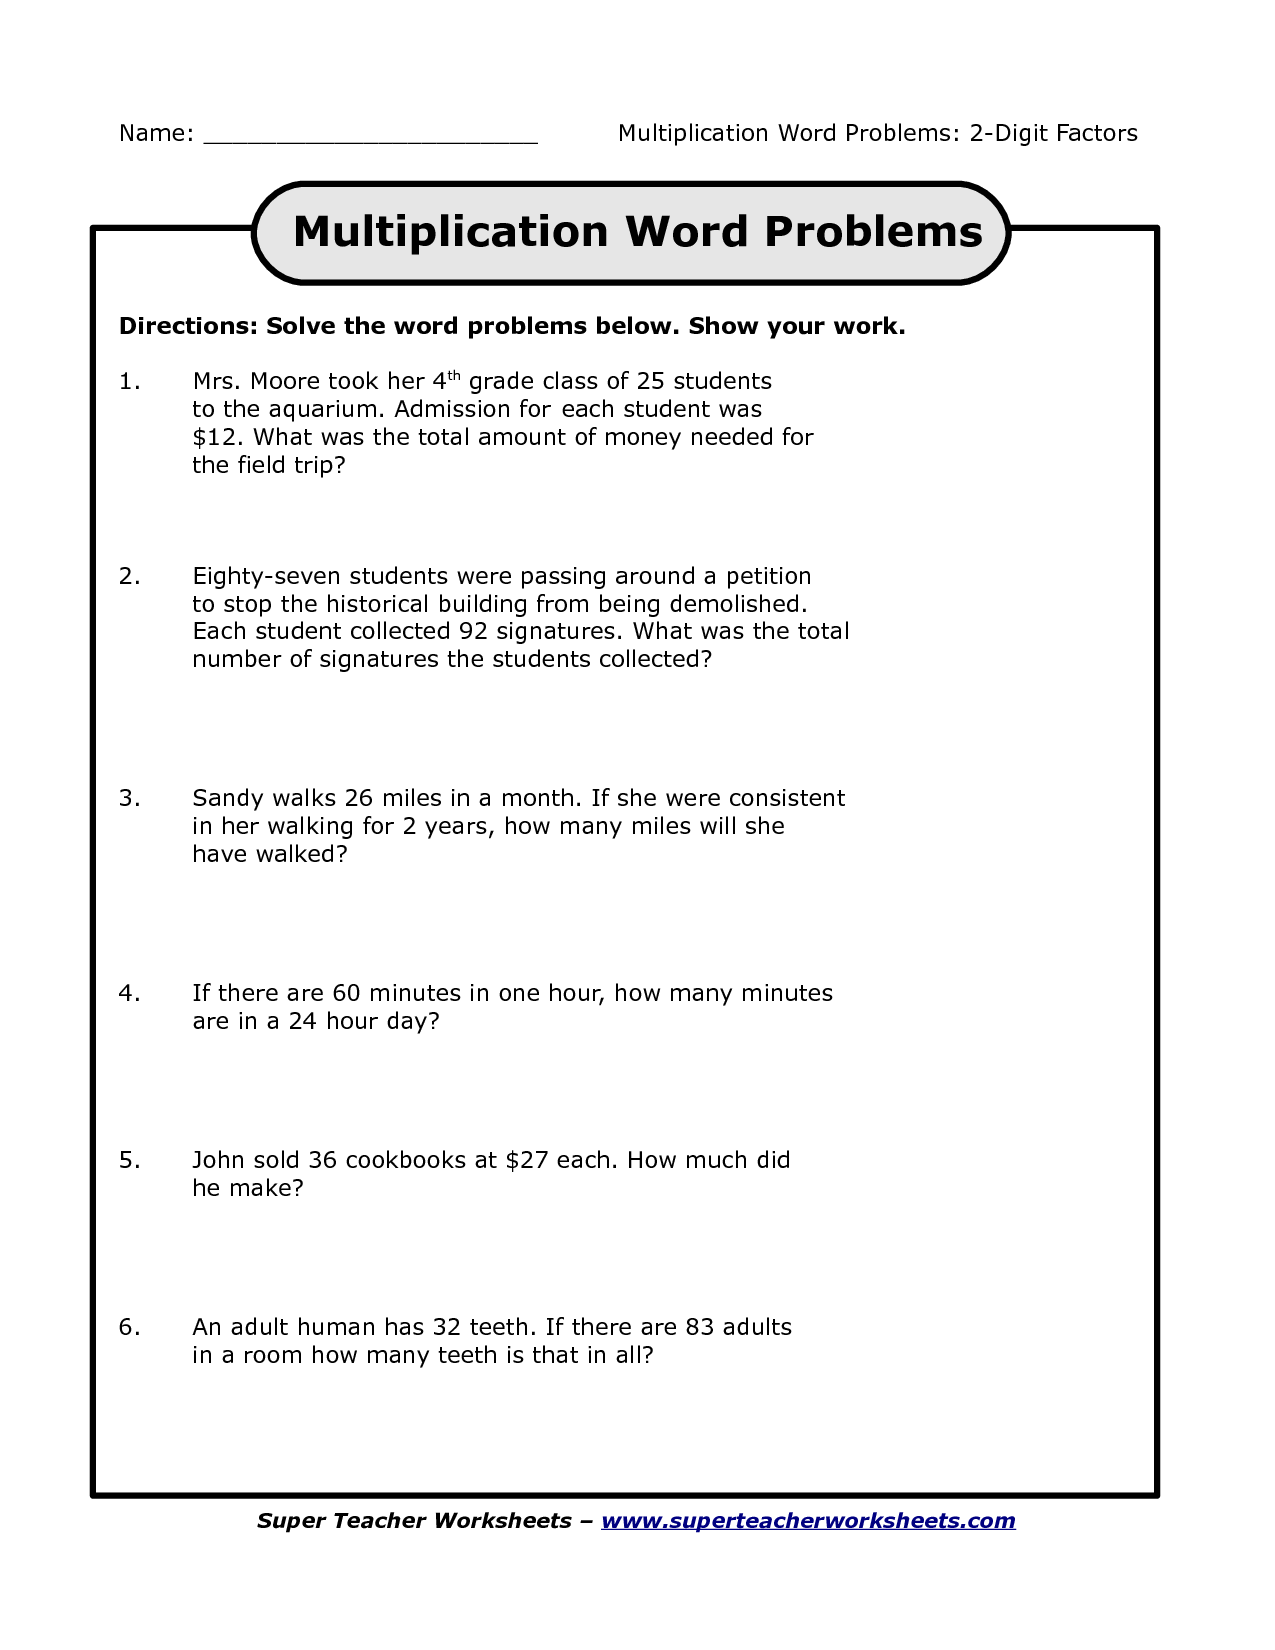 search-results-for-math-multiplication-word-problem-worksheets-calendar-2015